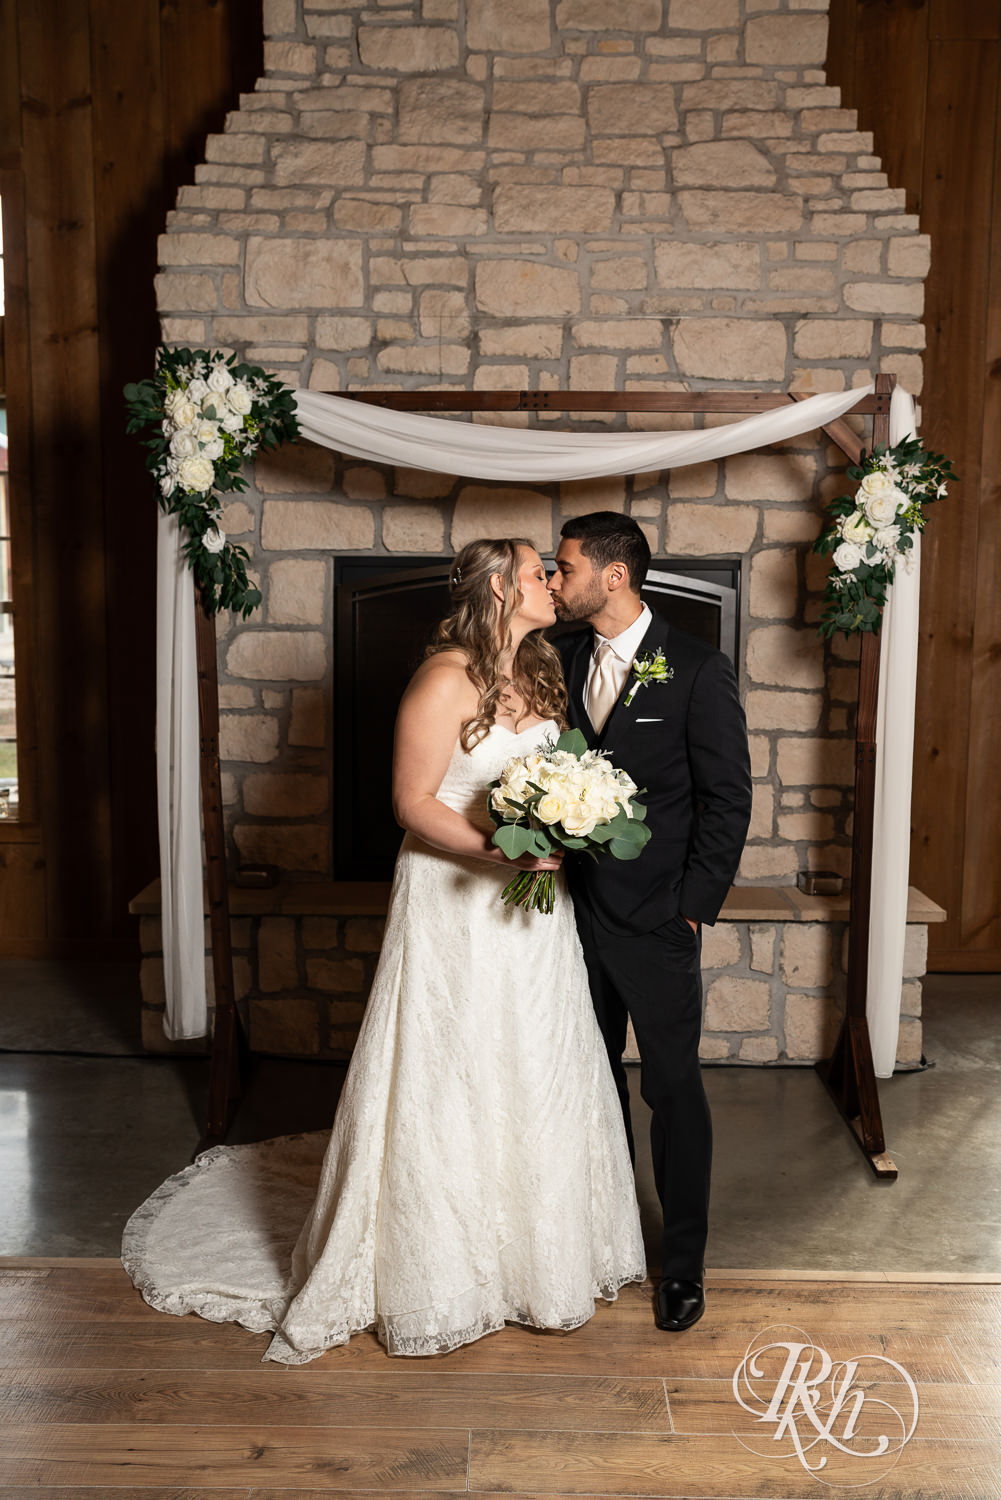 Bride and groom kiss in front of a fireplace at Almquist Farm in Hastings, Minnesota.